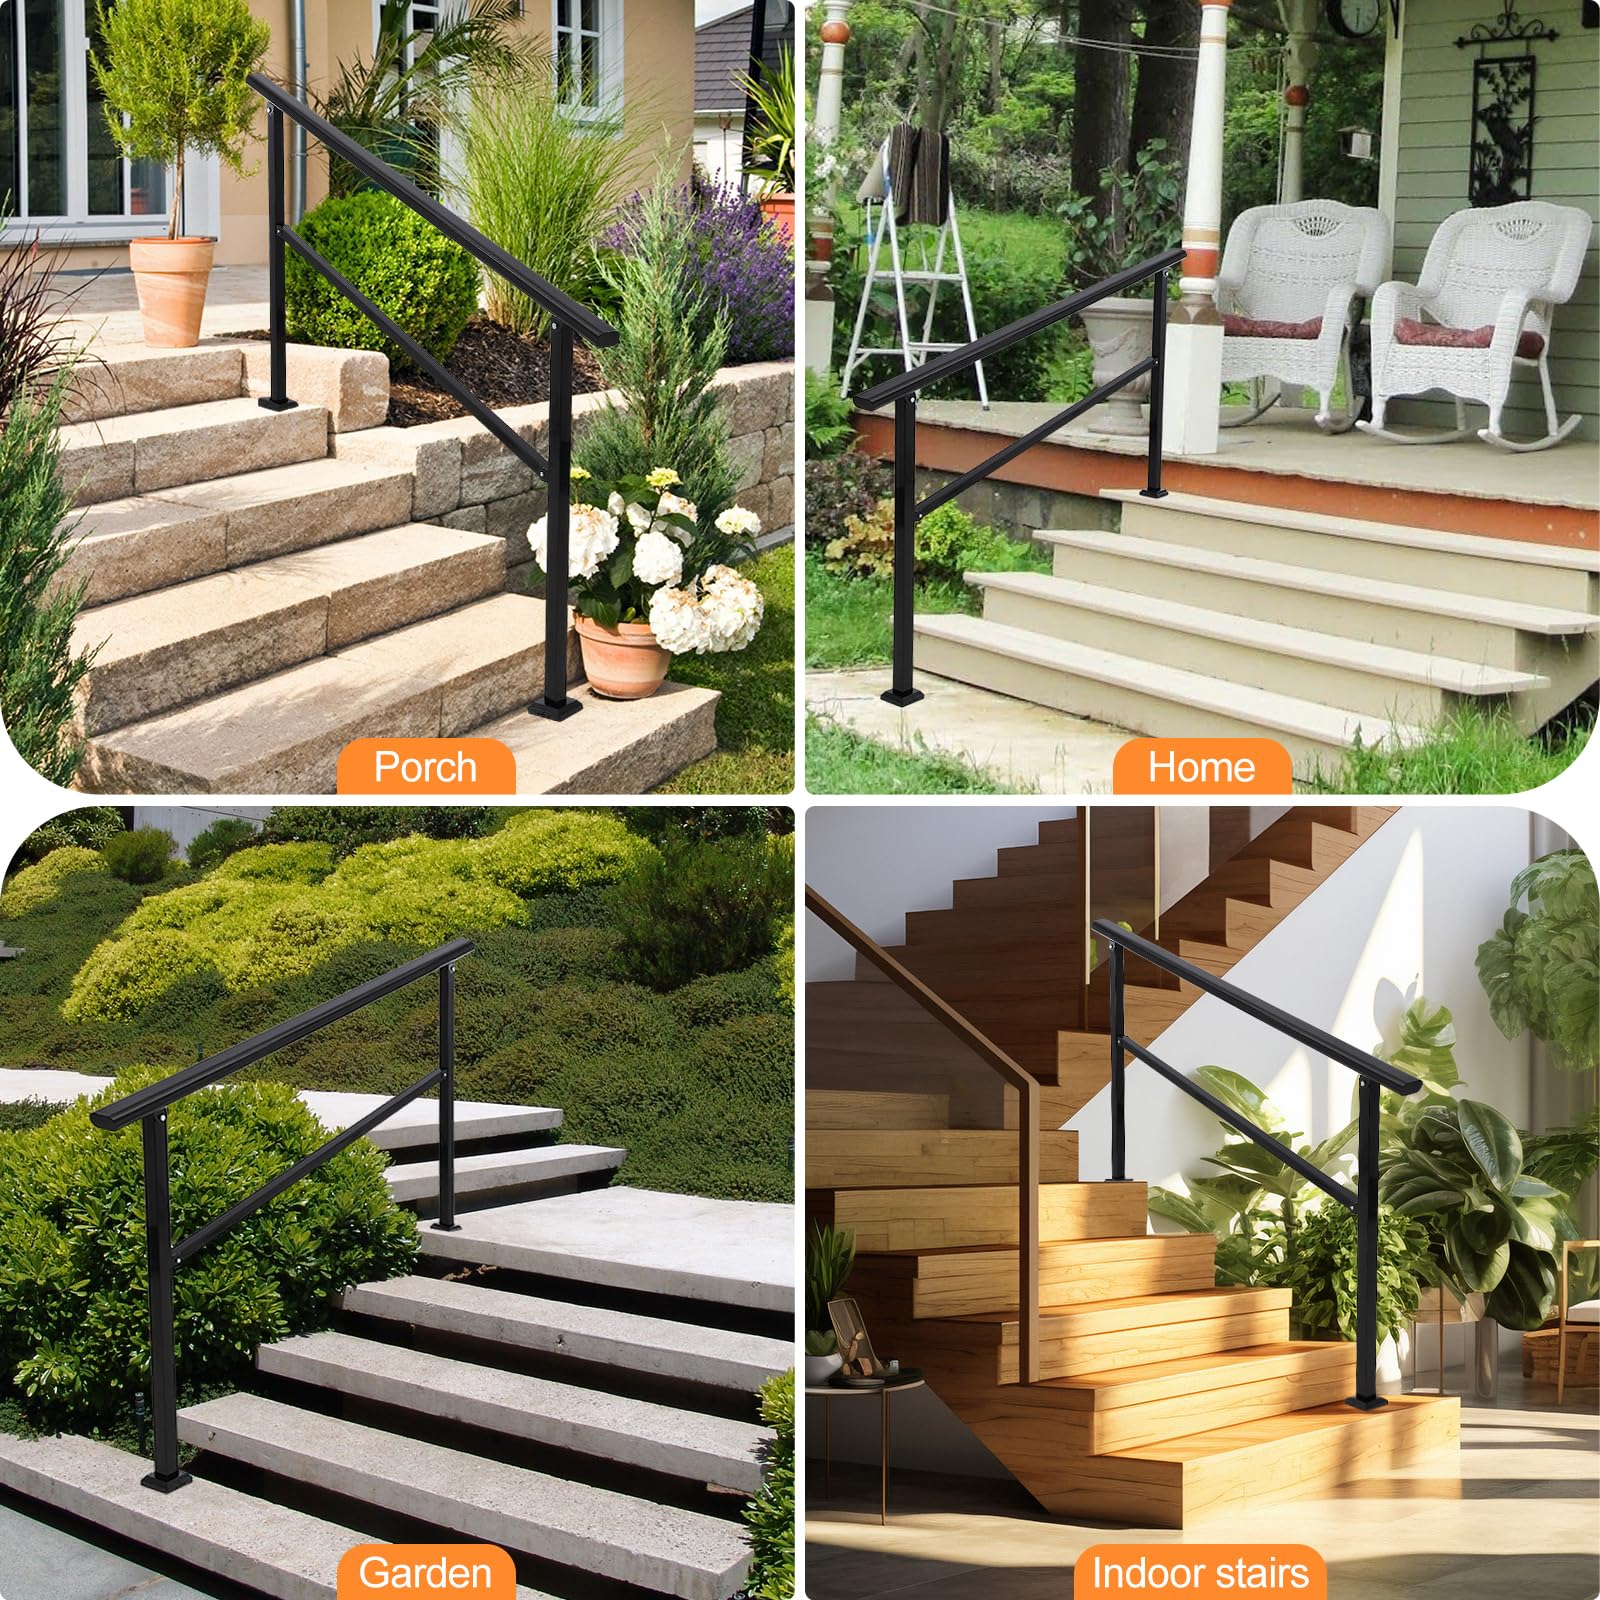 Outdoor Handrails Adjustable Height Stair Handrail ,Integrated Design at Handrail,Staircase Handrail for Outdoor and Indoor Concrete, Porch, Mixed, Step,Brick Step